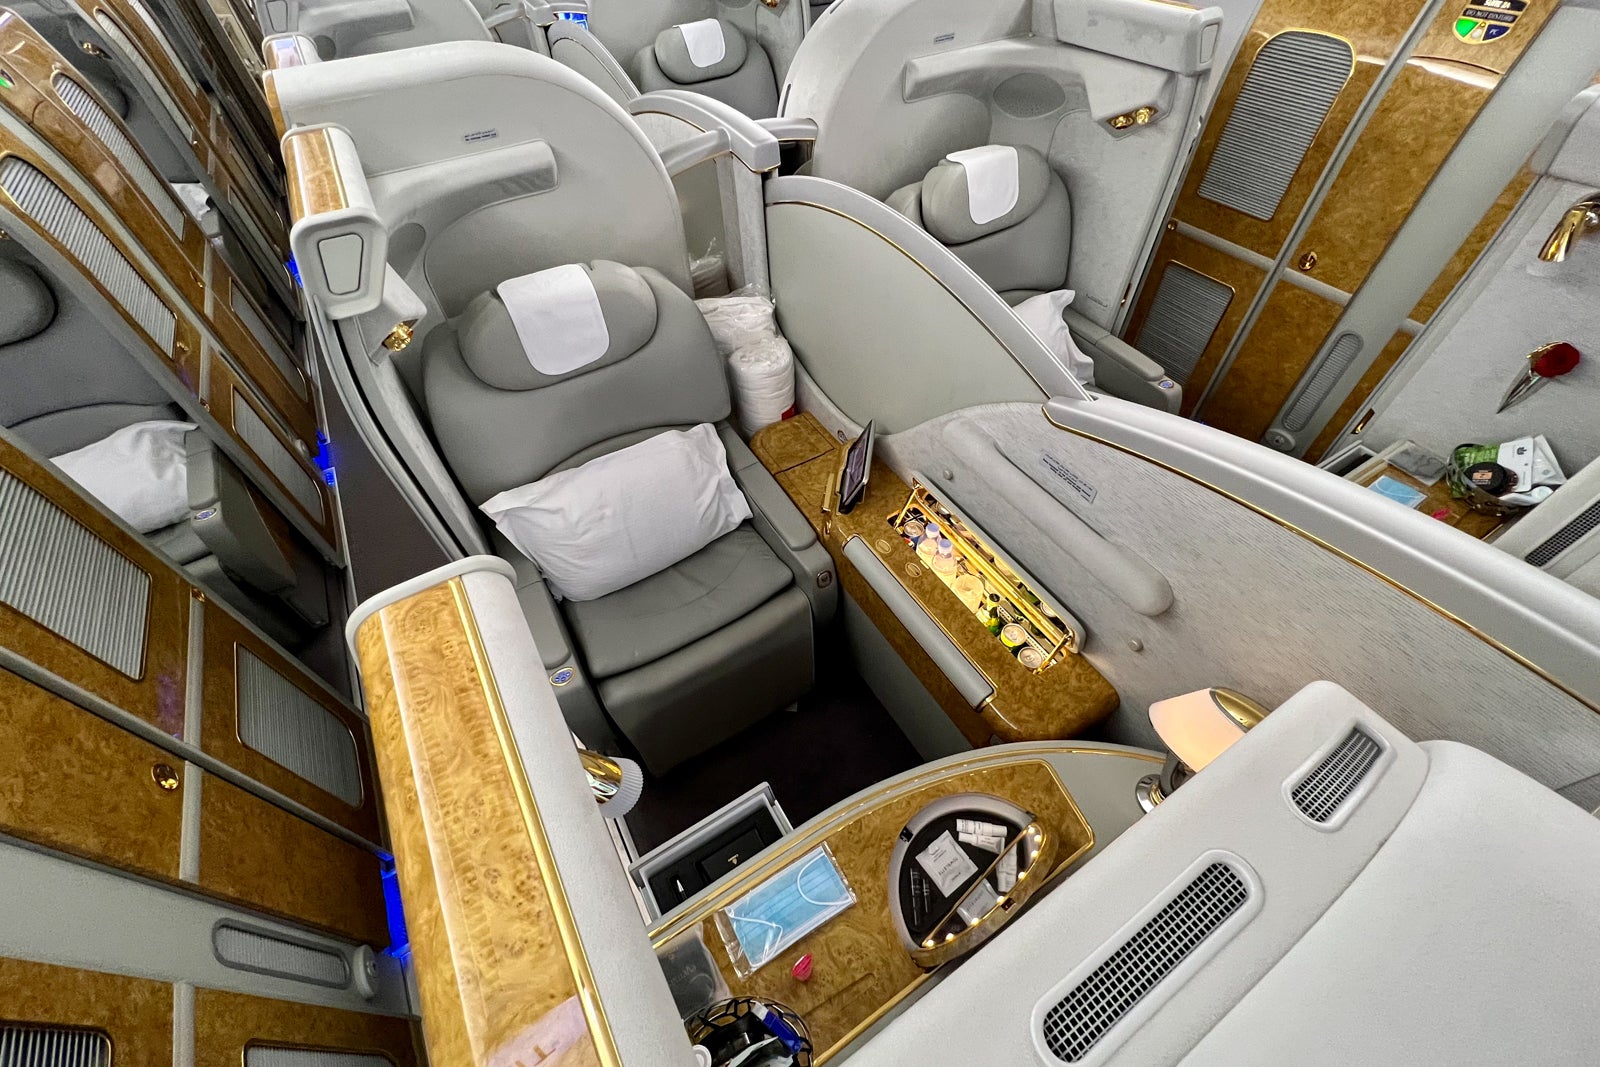 How to upgrade to first class without using a ton of cash